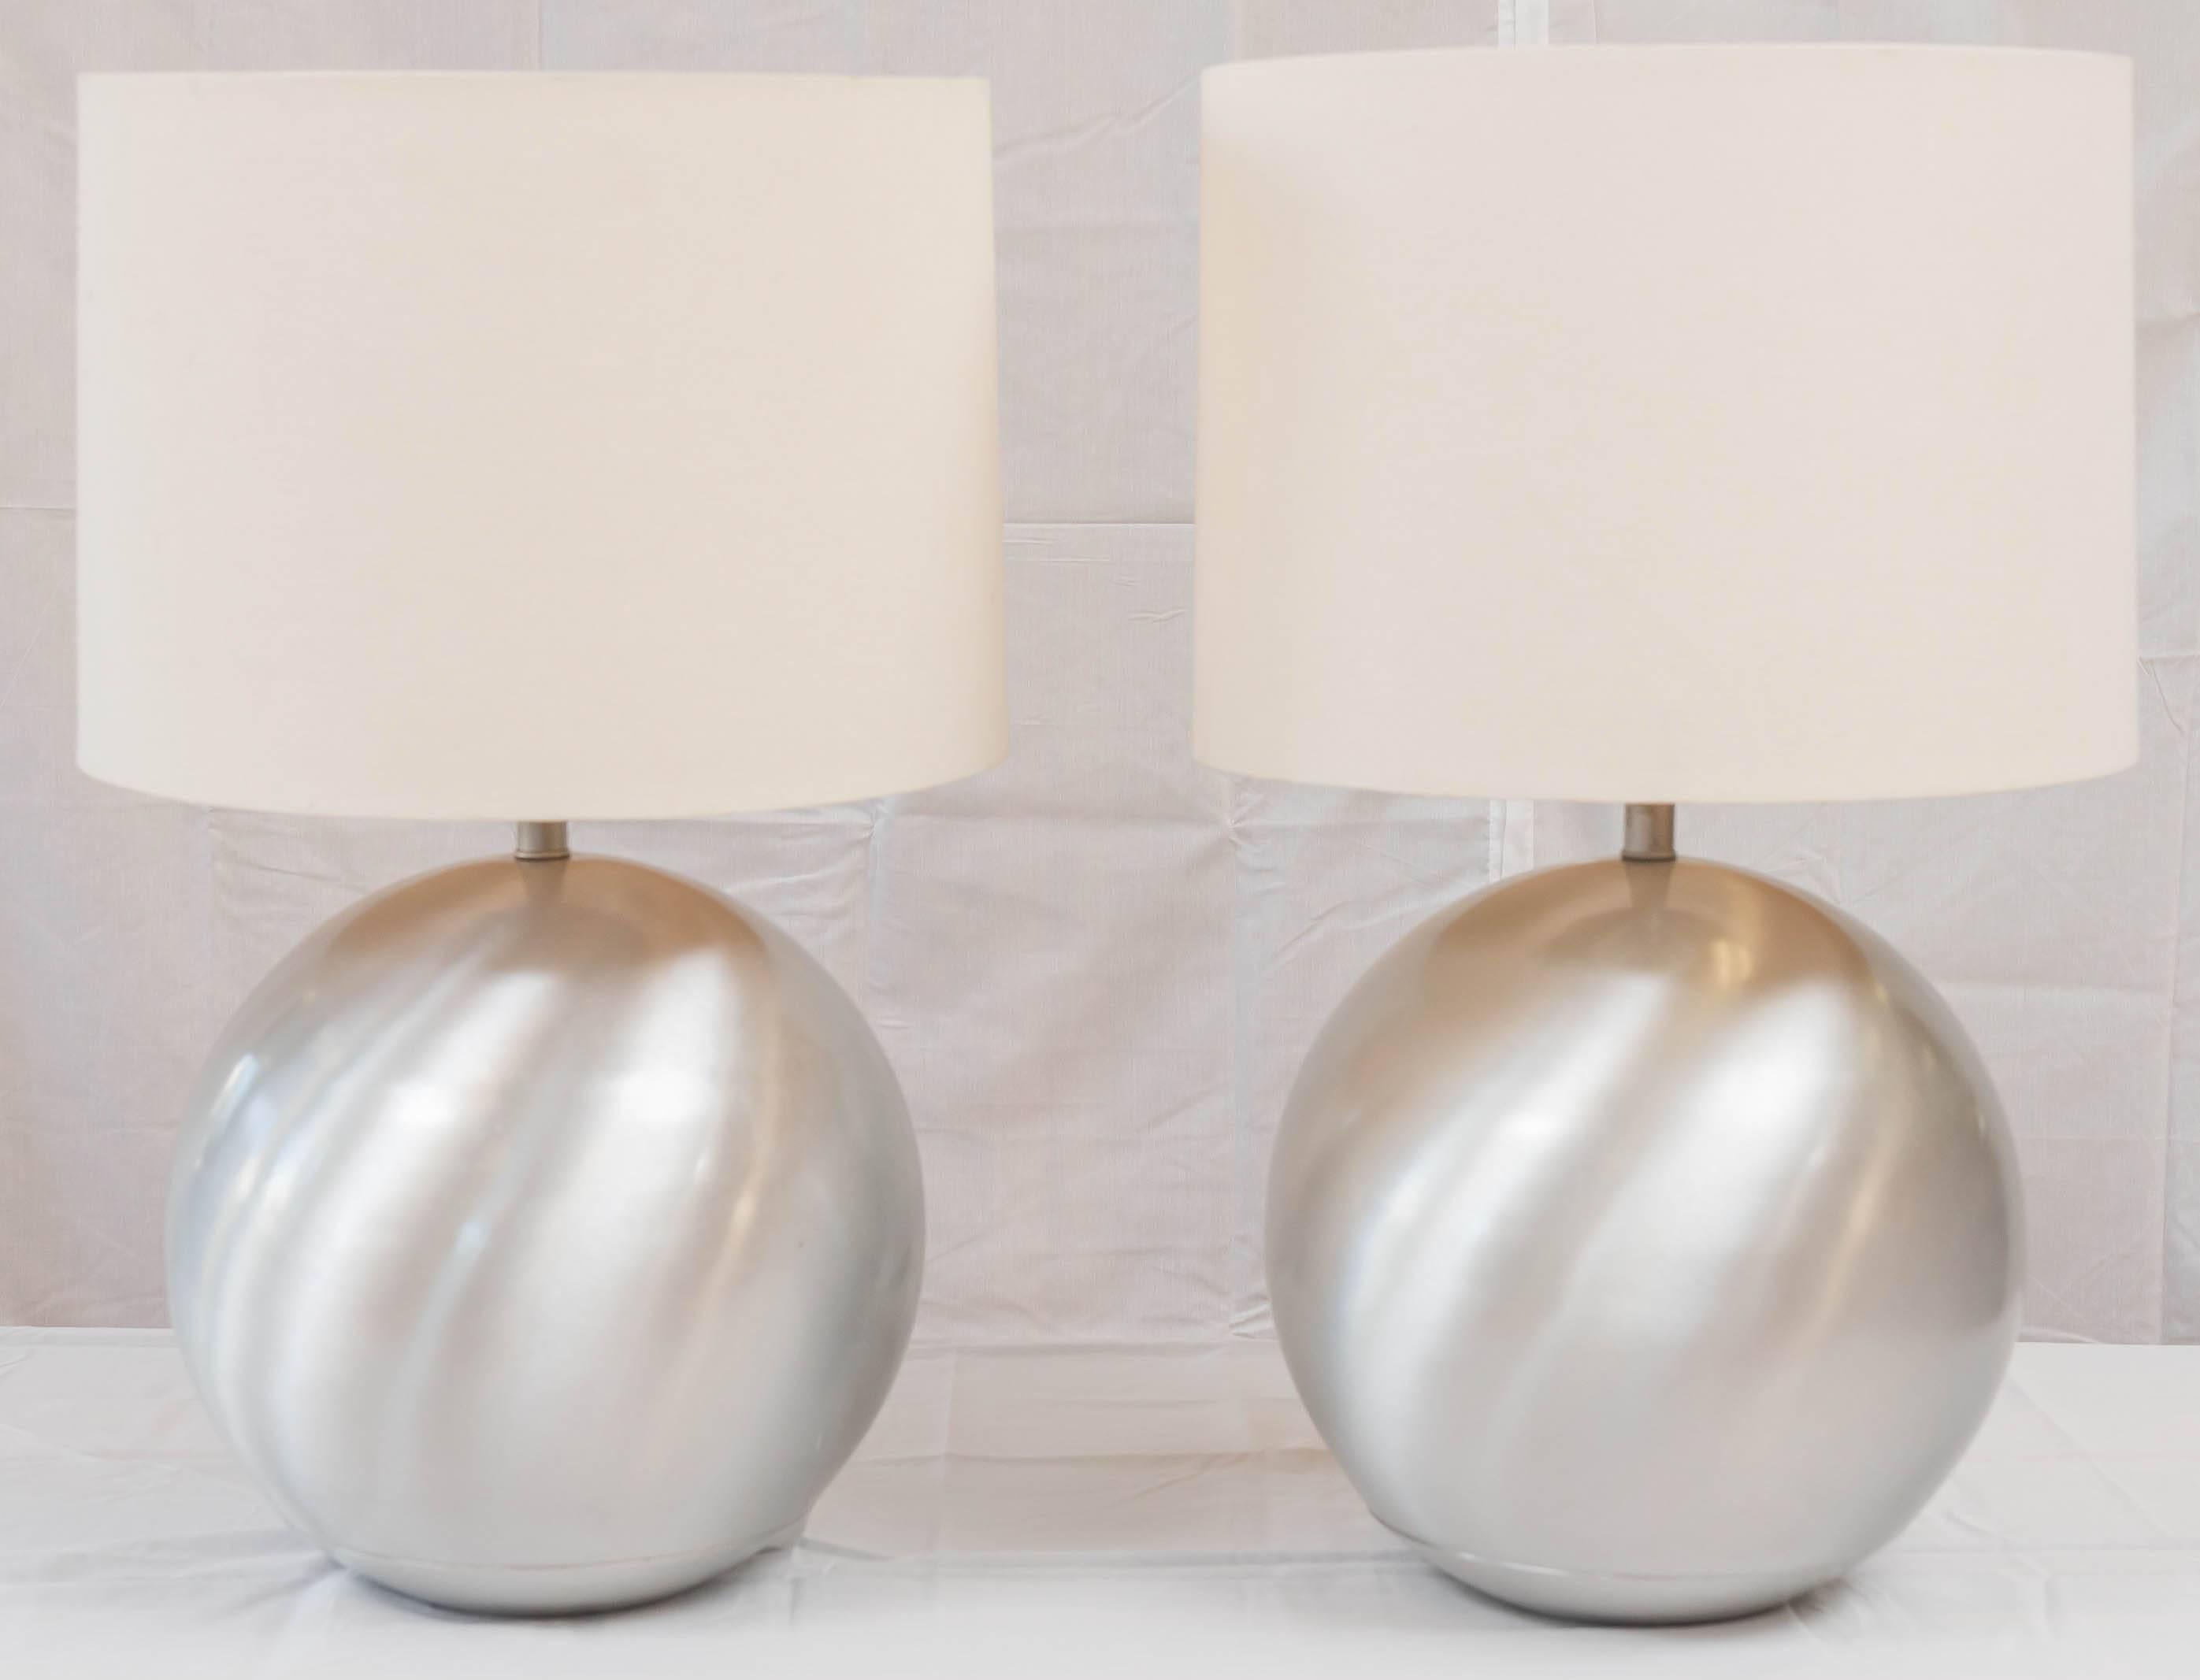 A very nice looking pair Russel Wright for Raymor spun aluminum lamps, circa 1950s. Newly rewired, new sockets, cord and plug. (Shades are not included) 